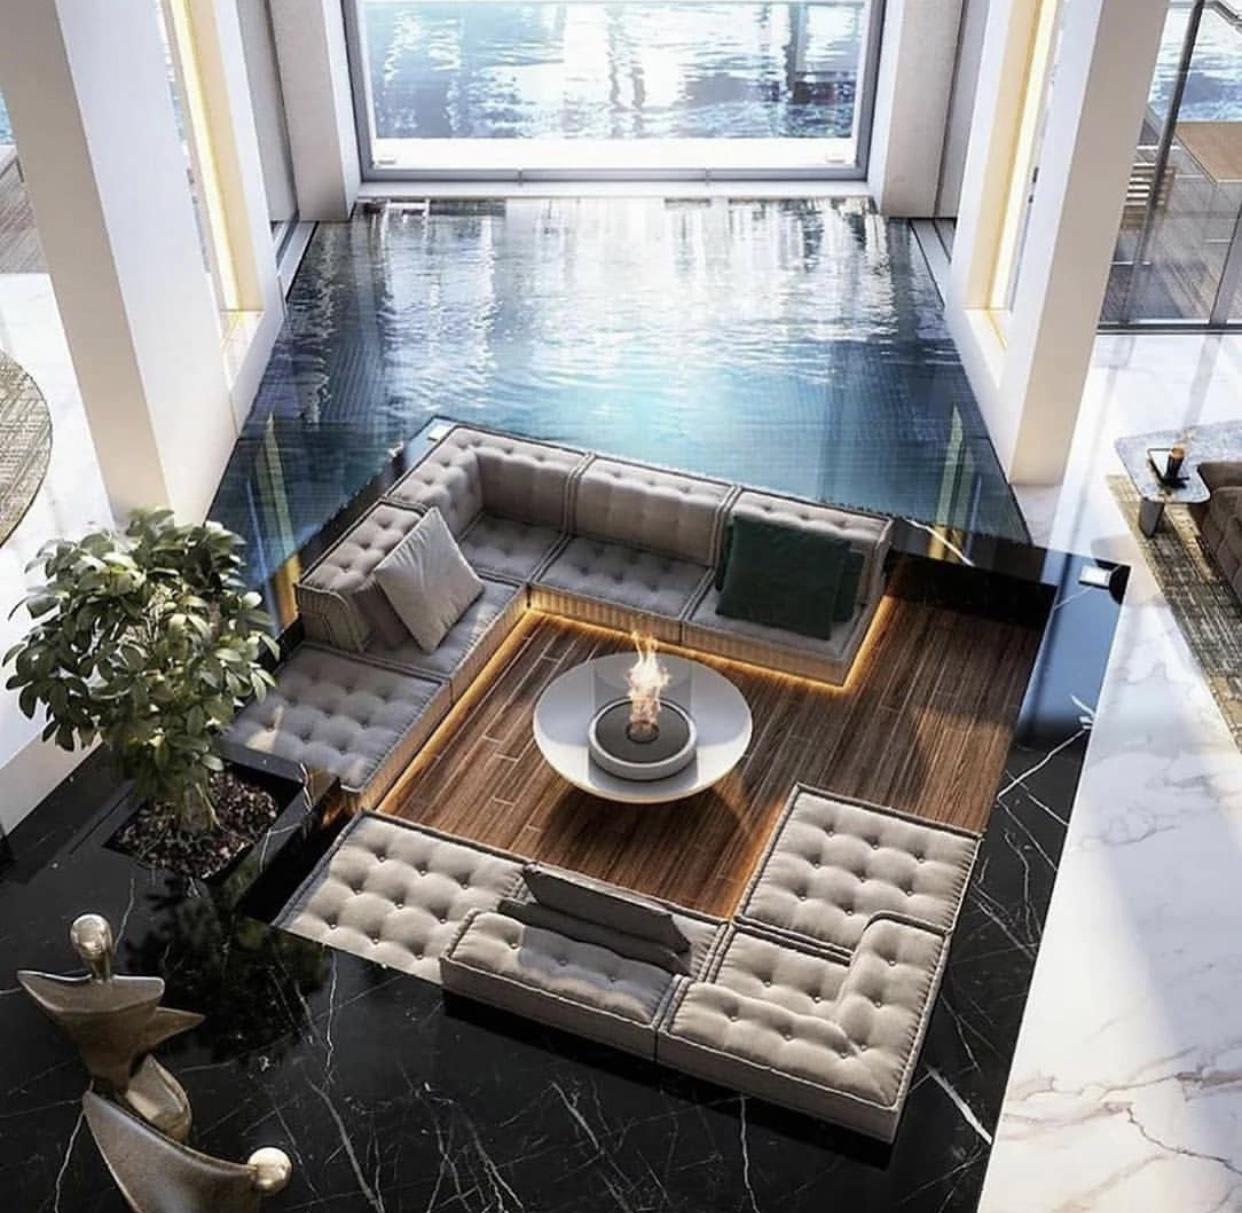 I would live here forever; conversation pit, pool is a lovely bonus